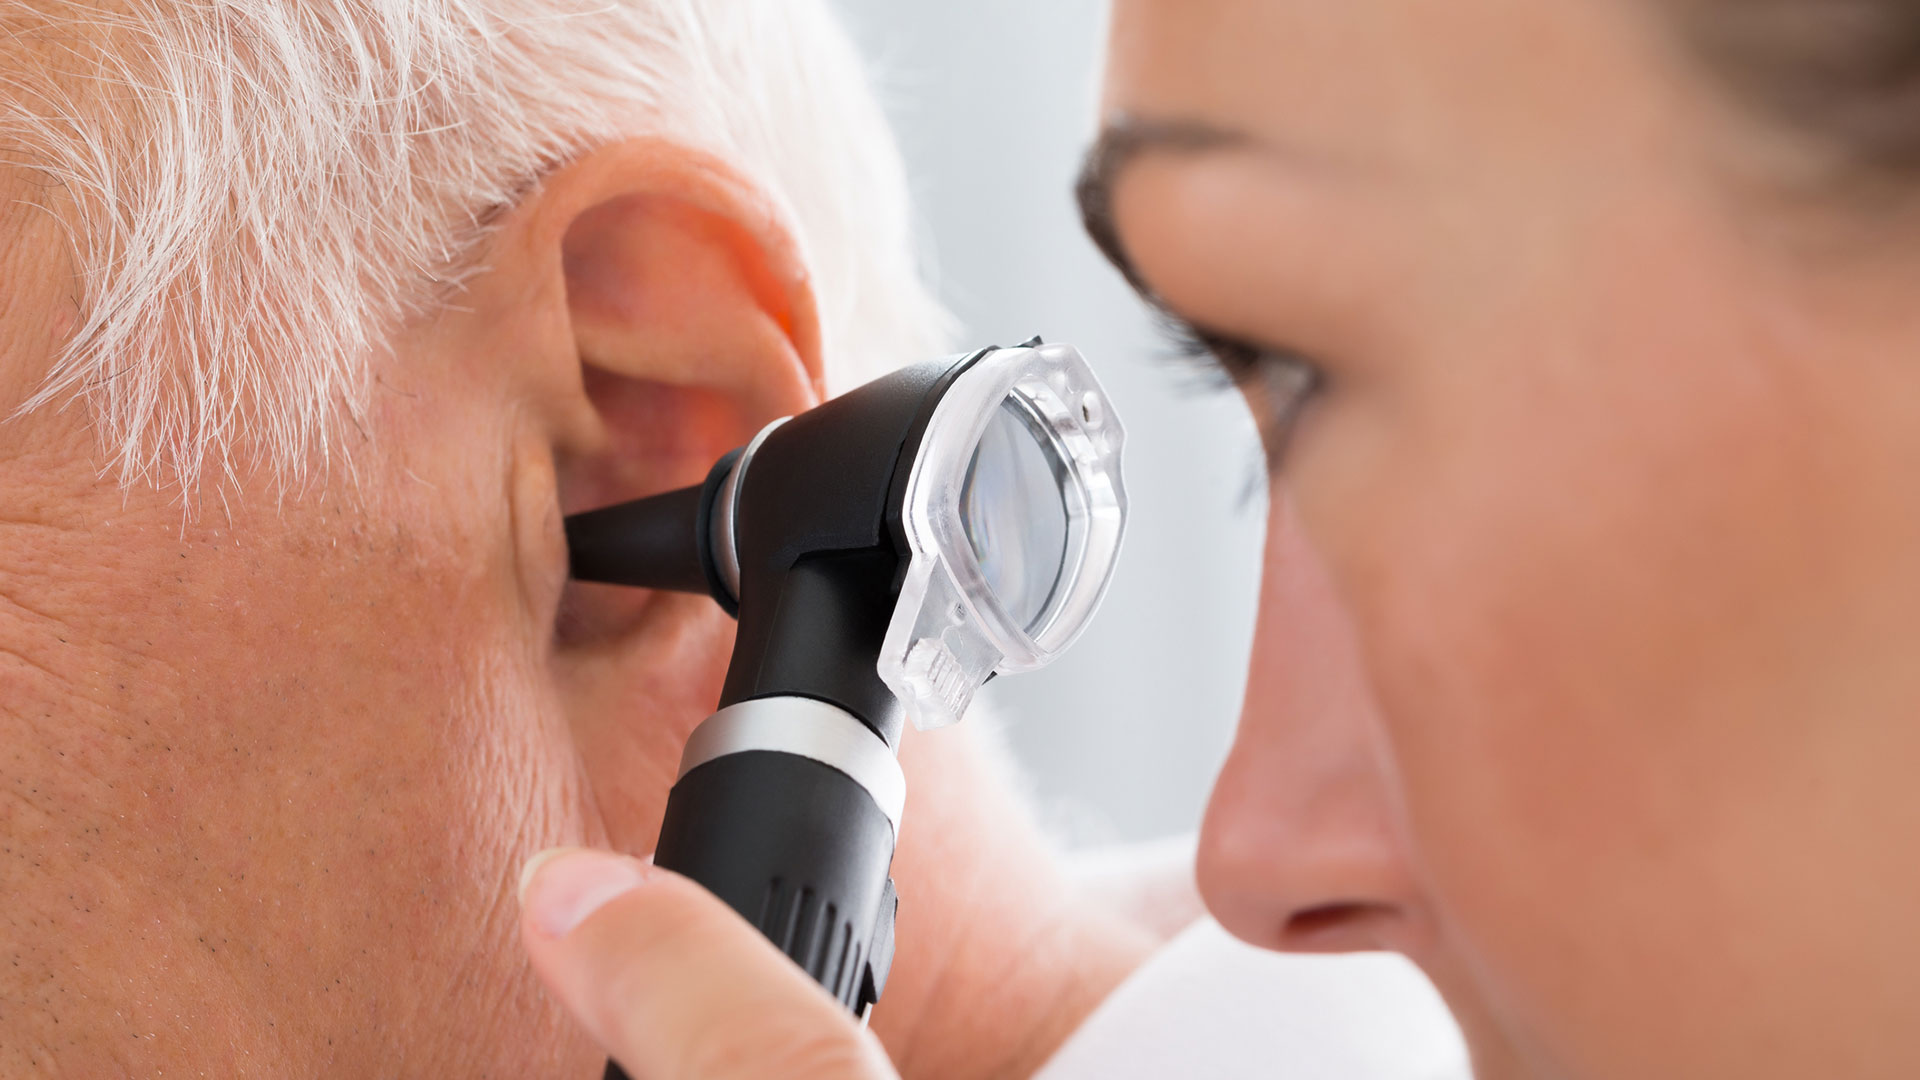 New study launches to investigate COVID-19 links to hearing loss